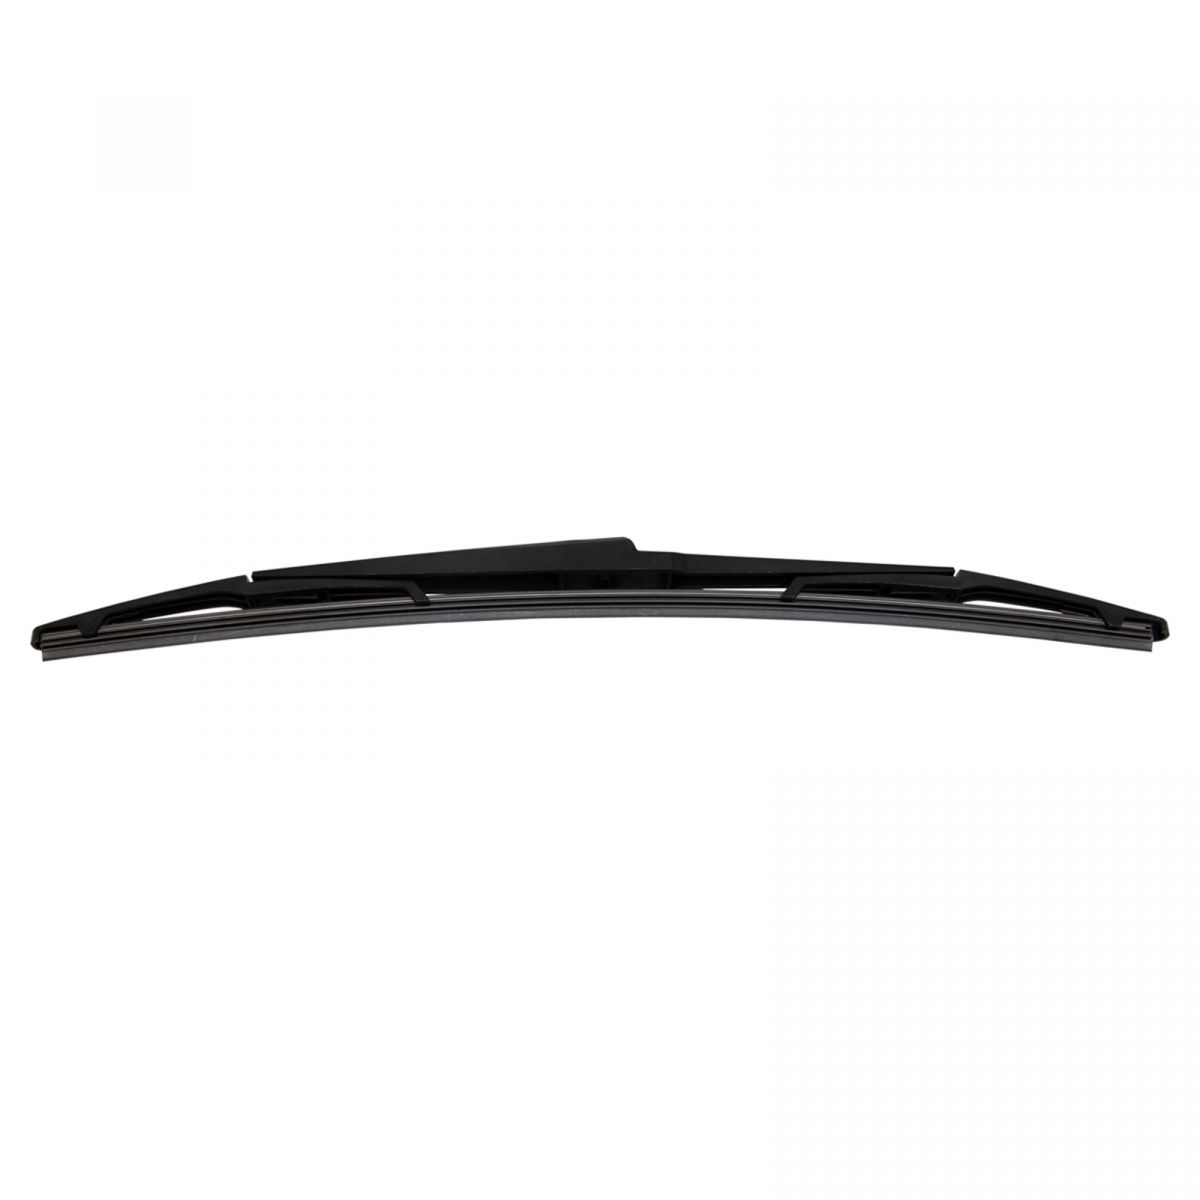 Trico Exact Fit 16-A 16" Rear Wiper Blade Assembly for Lexus Toyota | eBay 2011 Lexus Rx 350 Wiper Blade Size